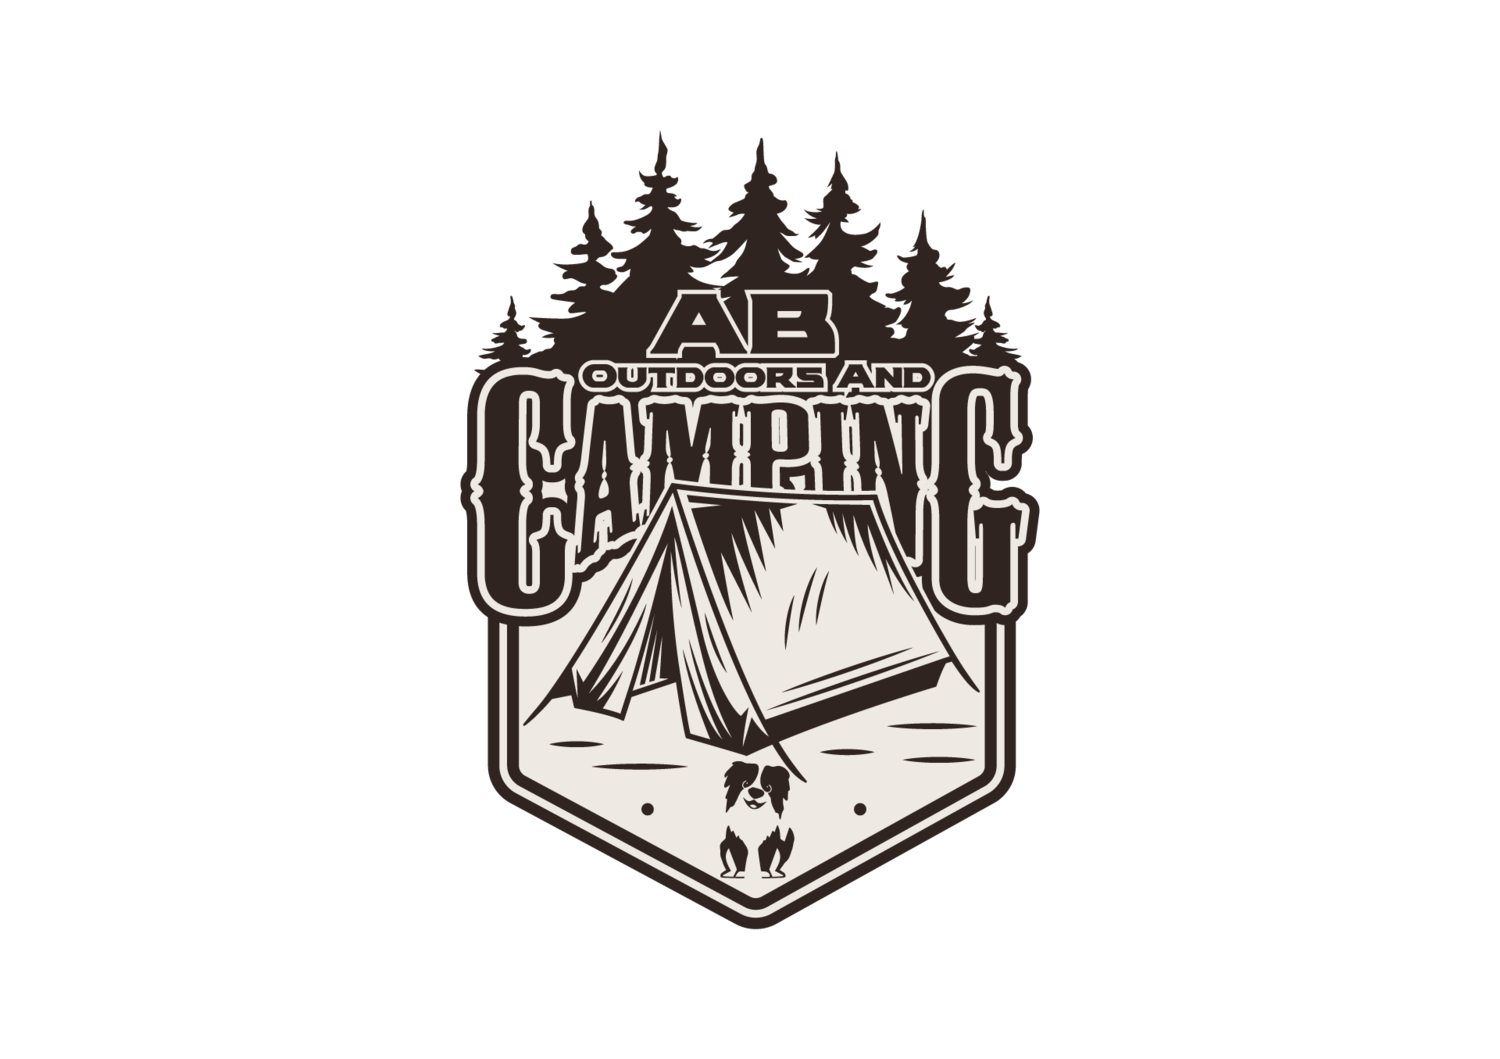 AB Camping and Outdoors